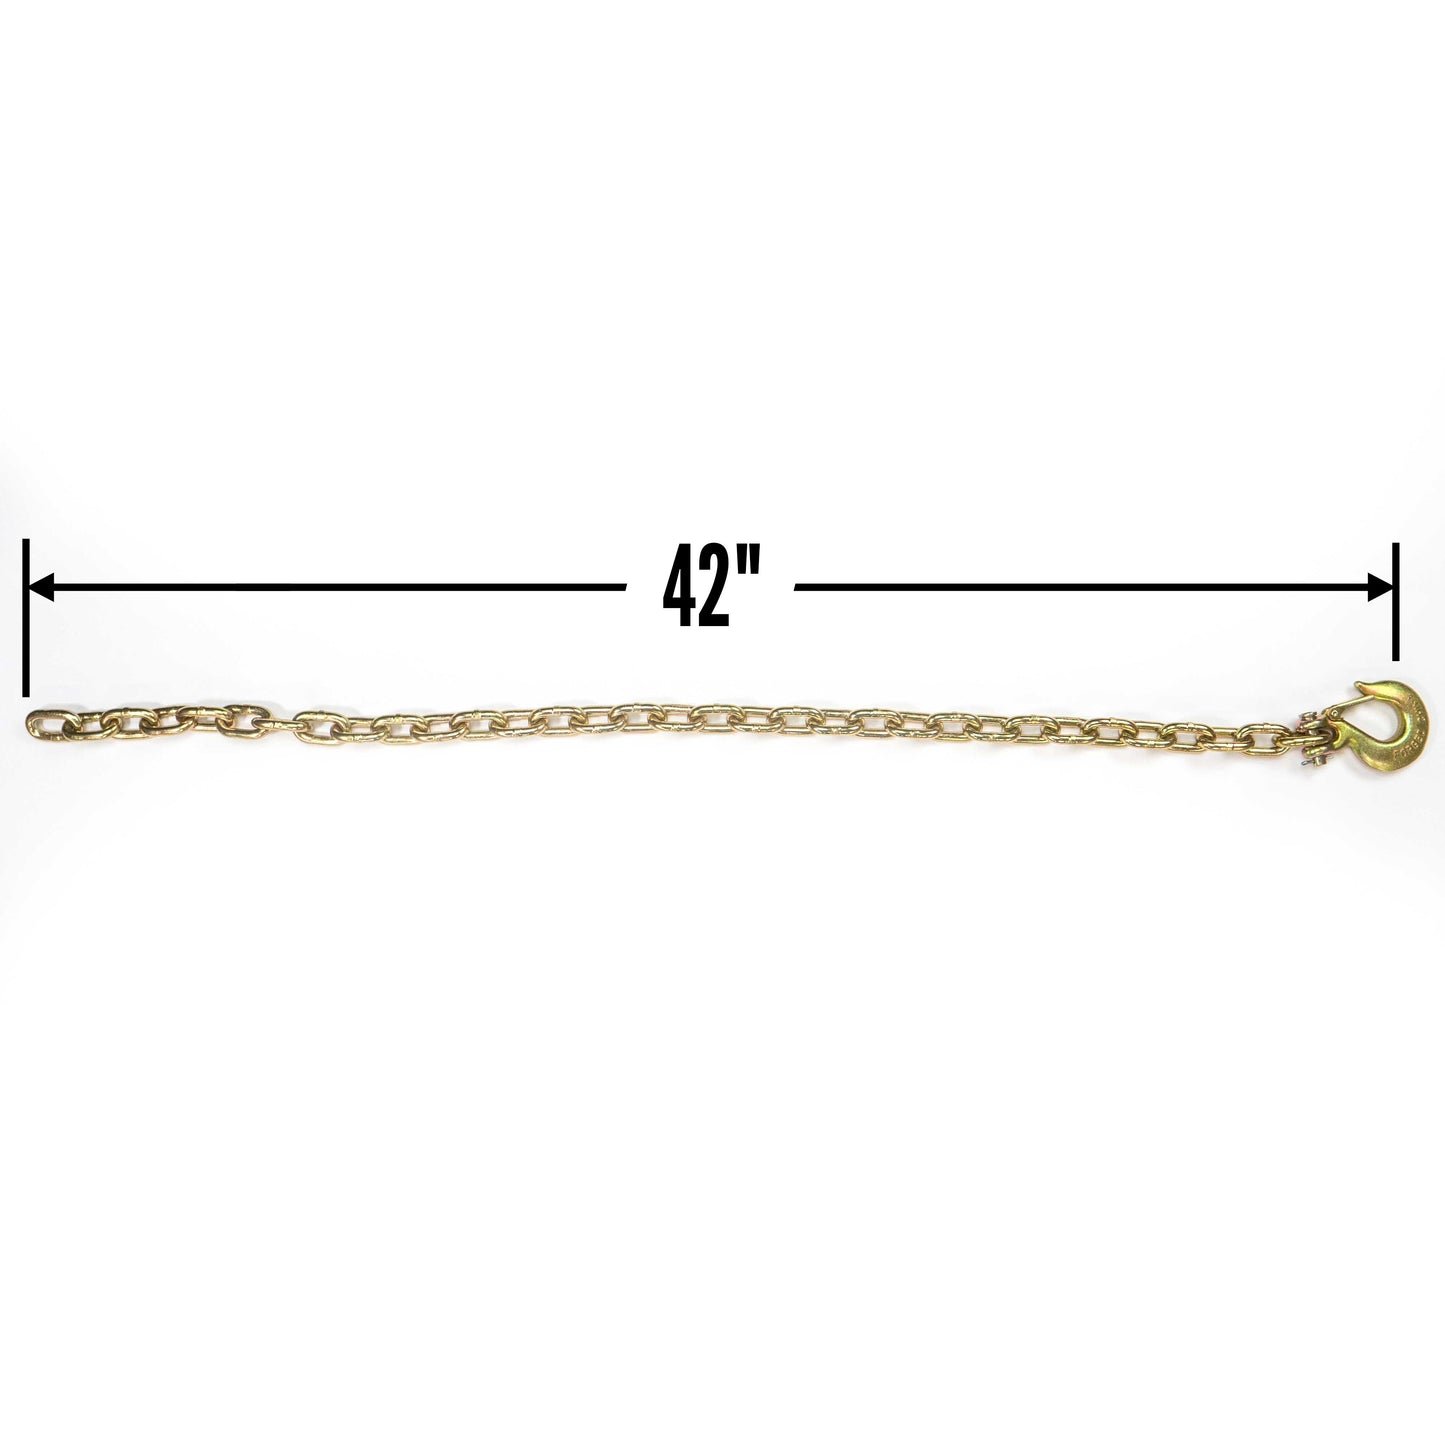 Safety Chain Grade 70 516 inch x 42 inch Pair image 2 of 6